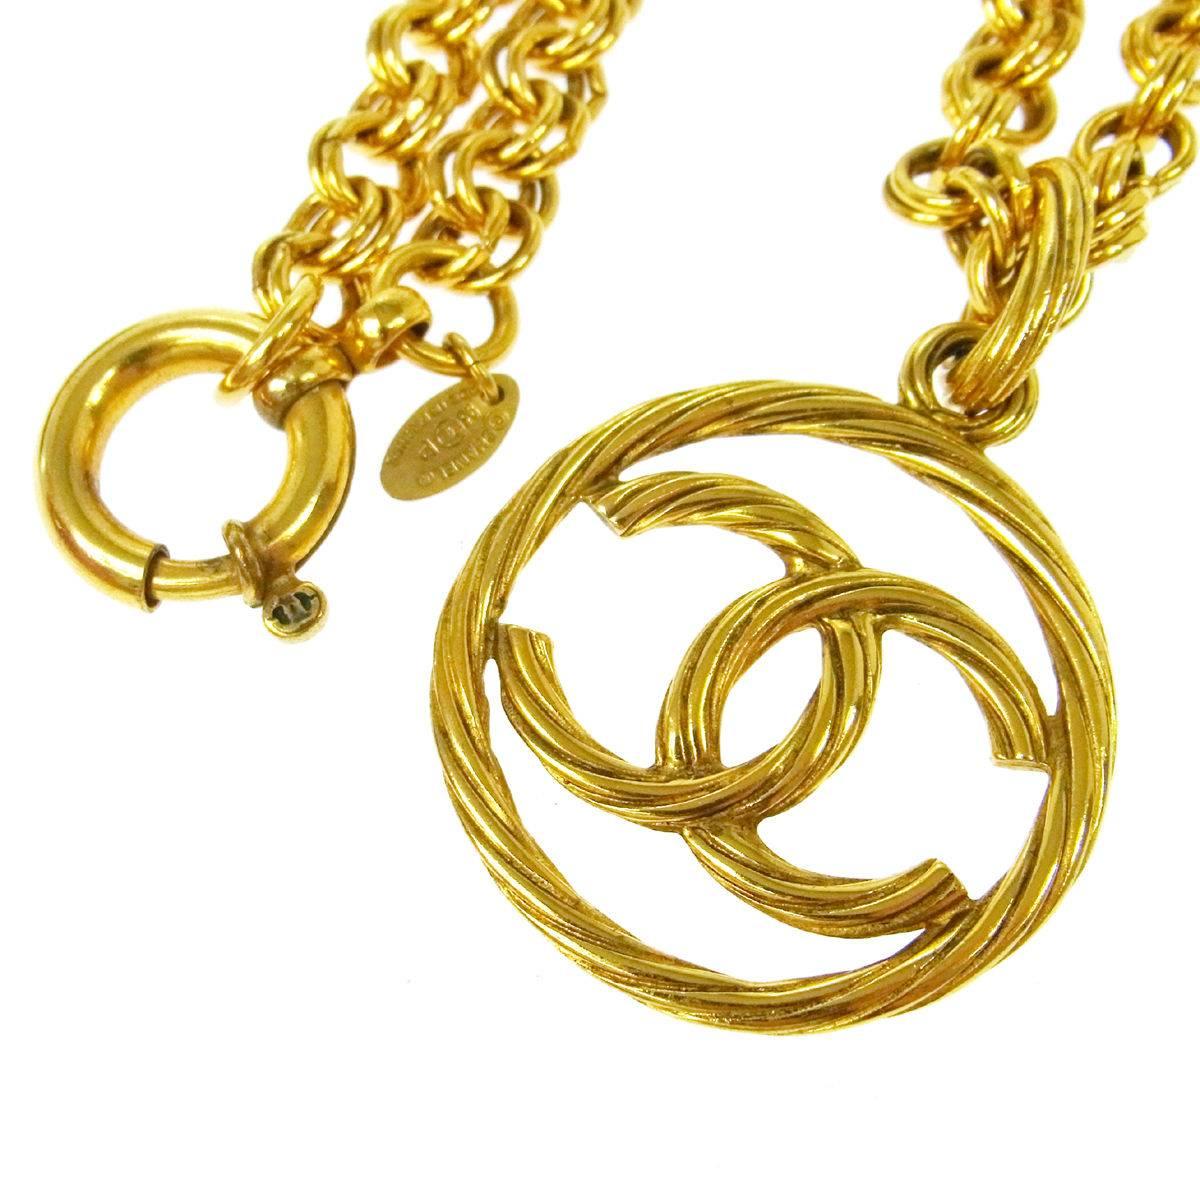 Chanel Vintage Textured Gold Charm Coin Pendant Link Necklace in Box

Metal
Gold tone
Lobster claw closure
Made in France
Charm diameter 1.5